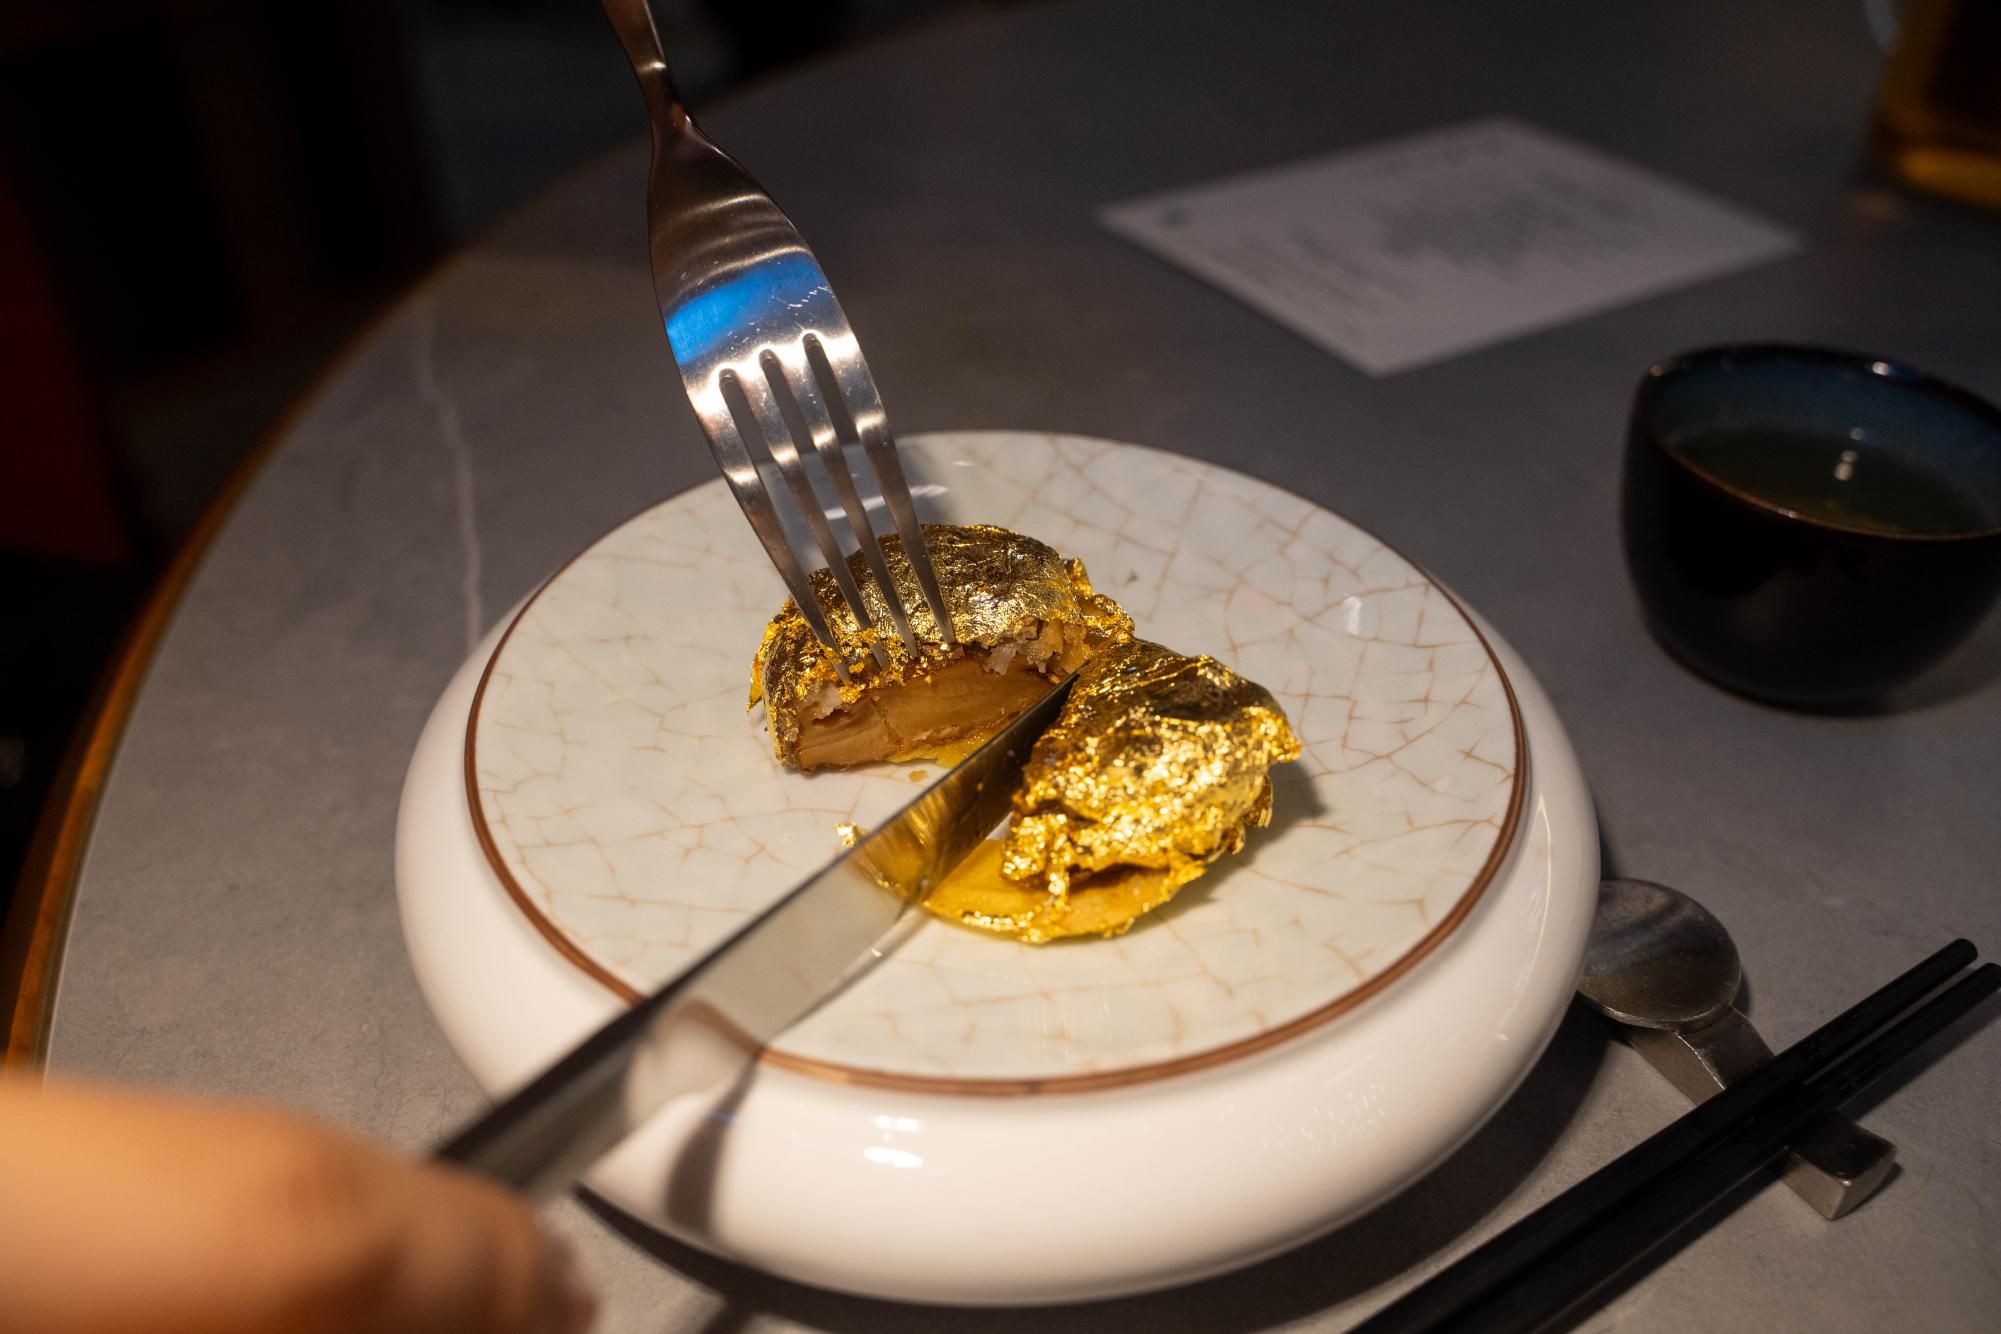 A knife and fork cut into a piece of gold leaf wrapped abalone.